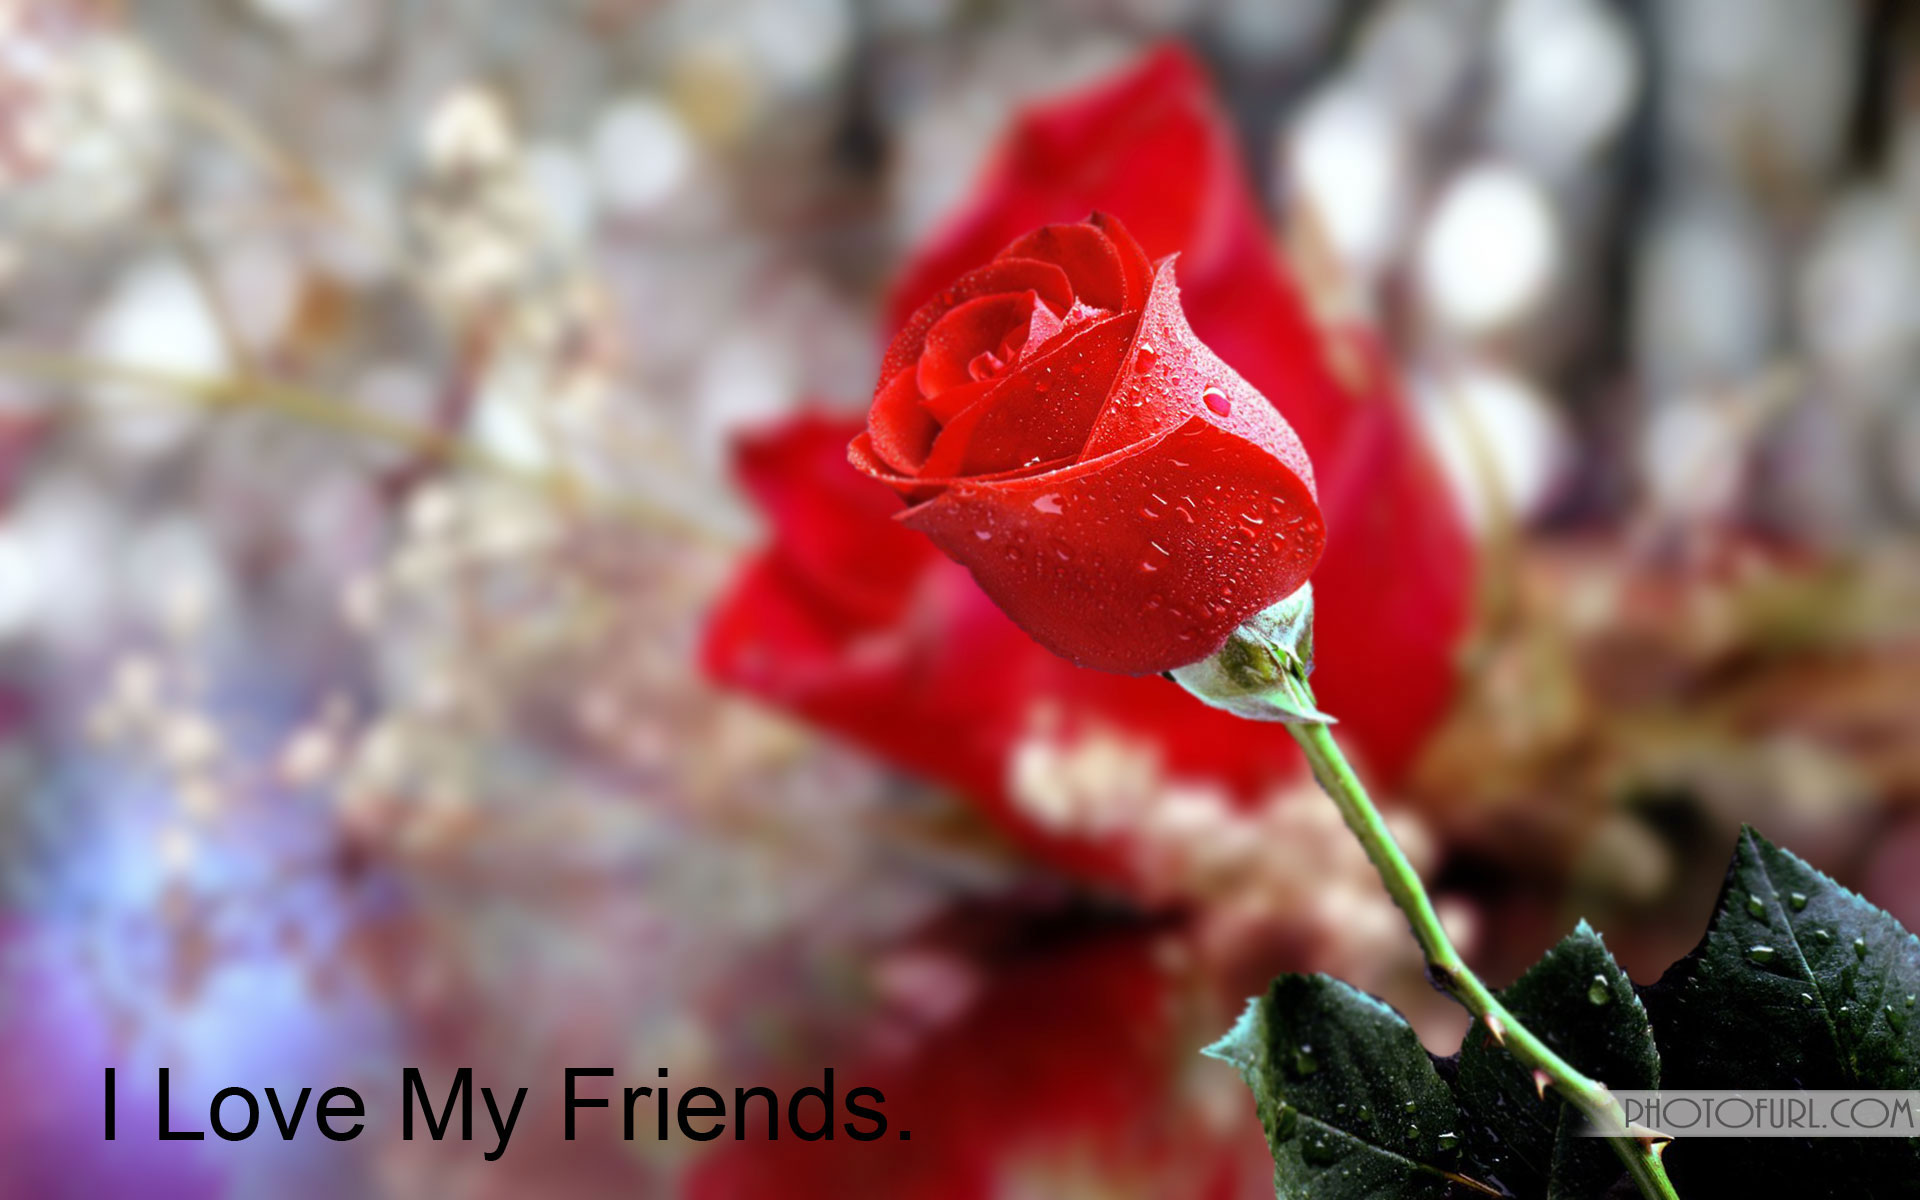 beautiful wallpapers of friendship love,flower,garden roses,red,petal,nature